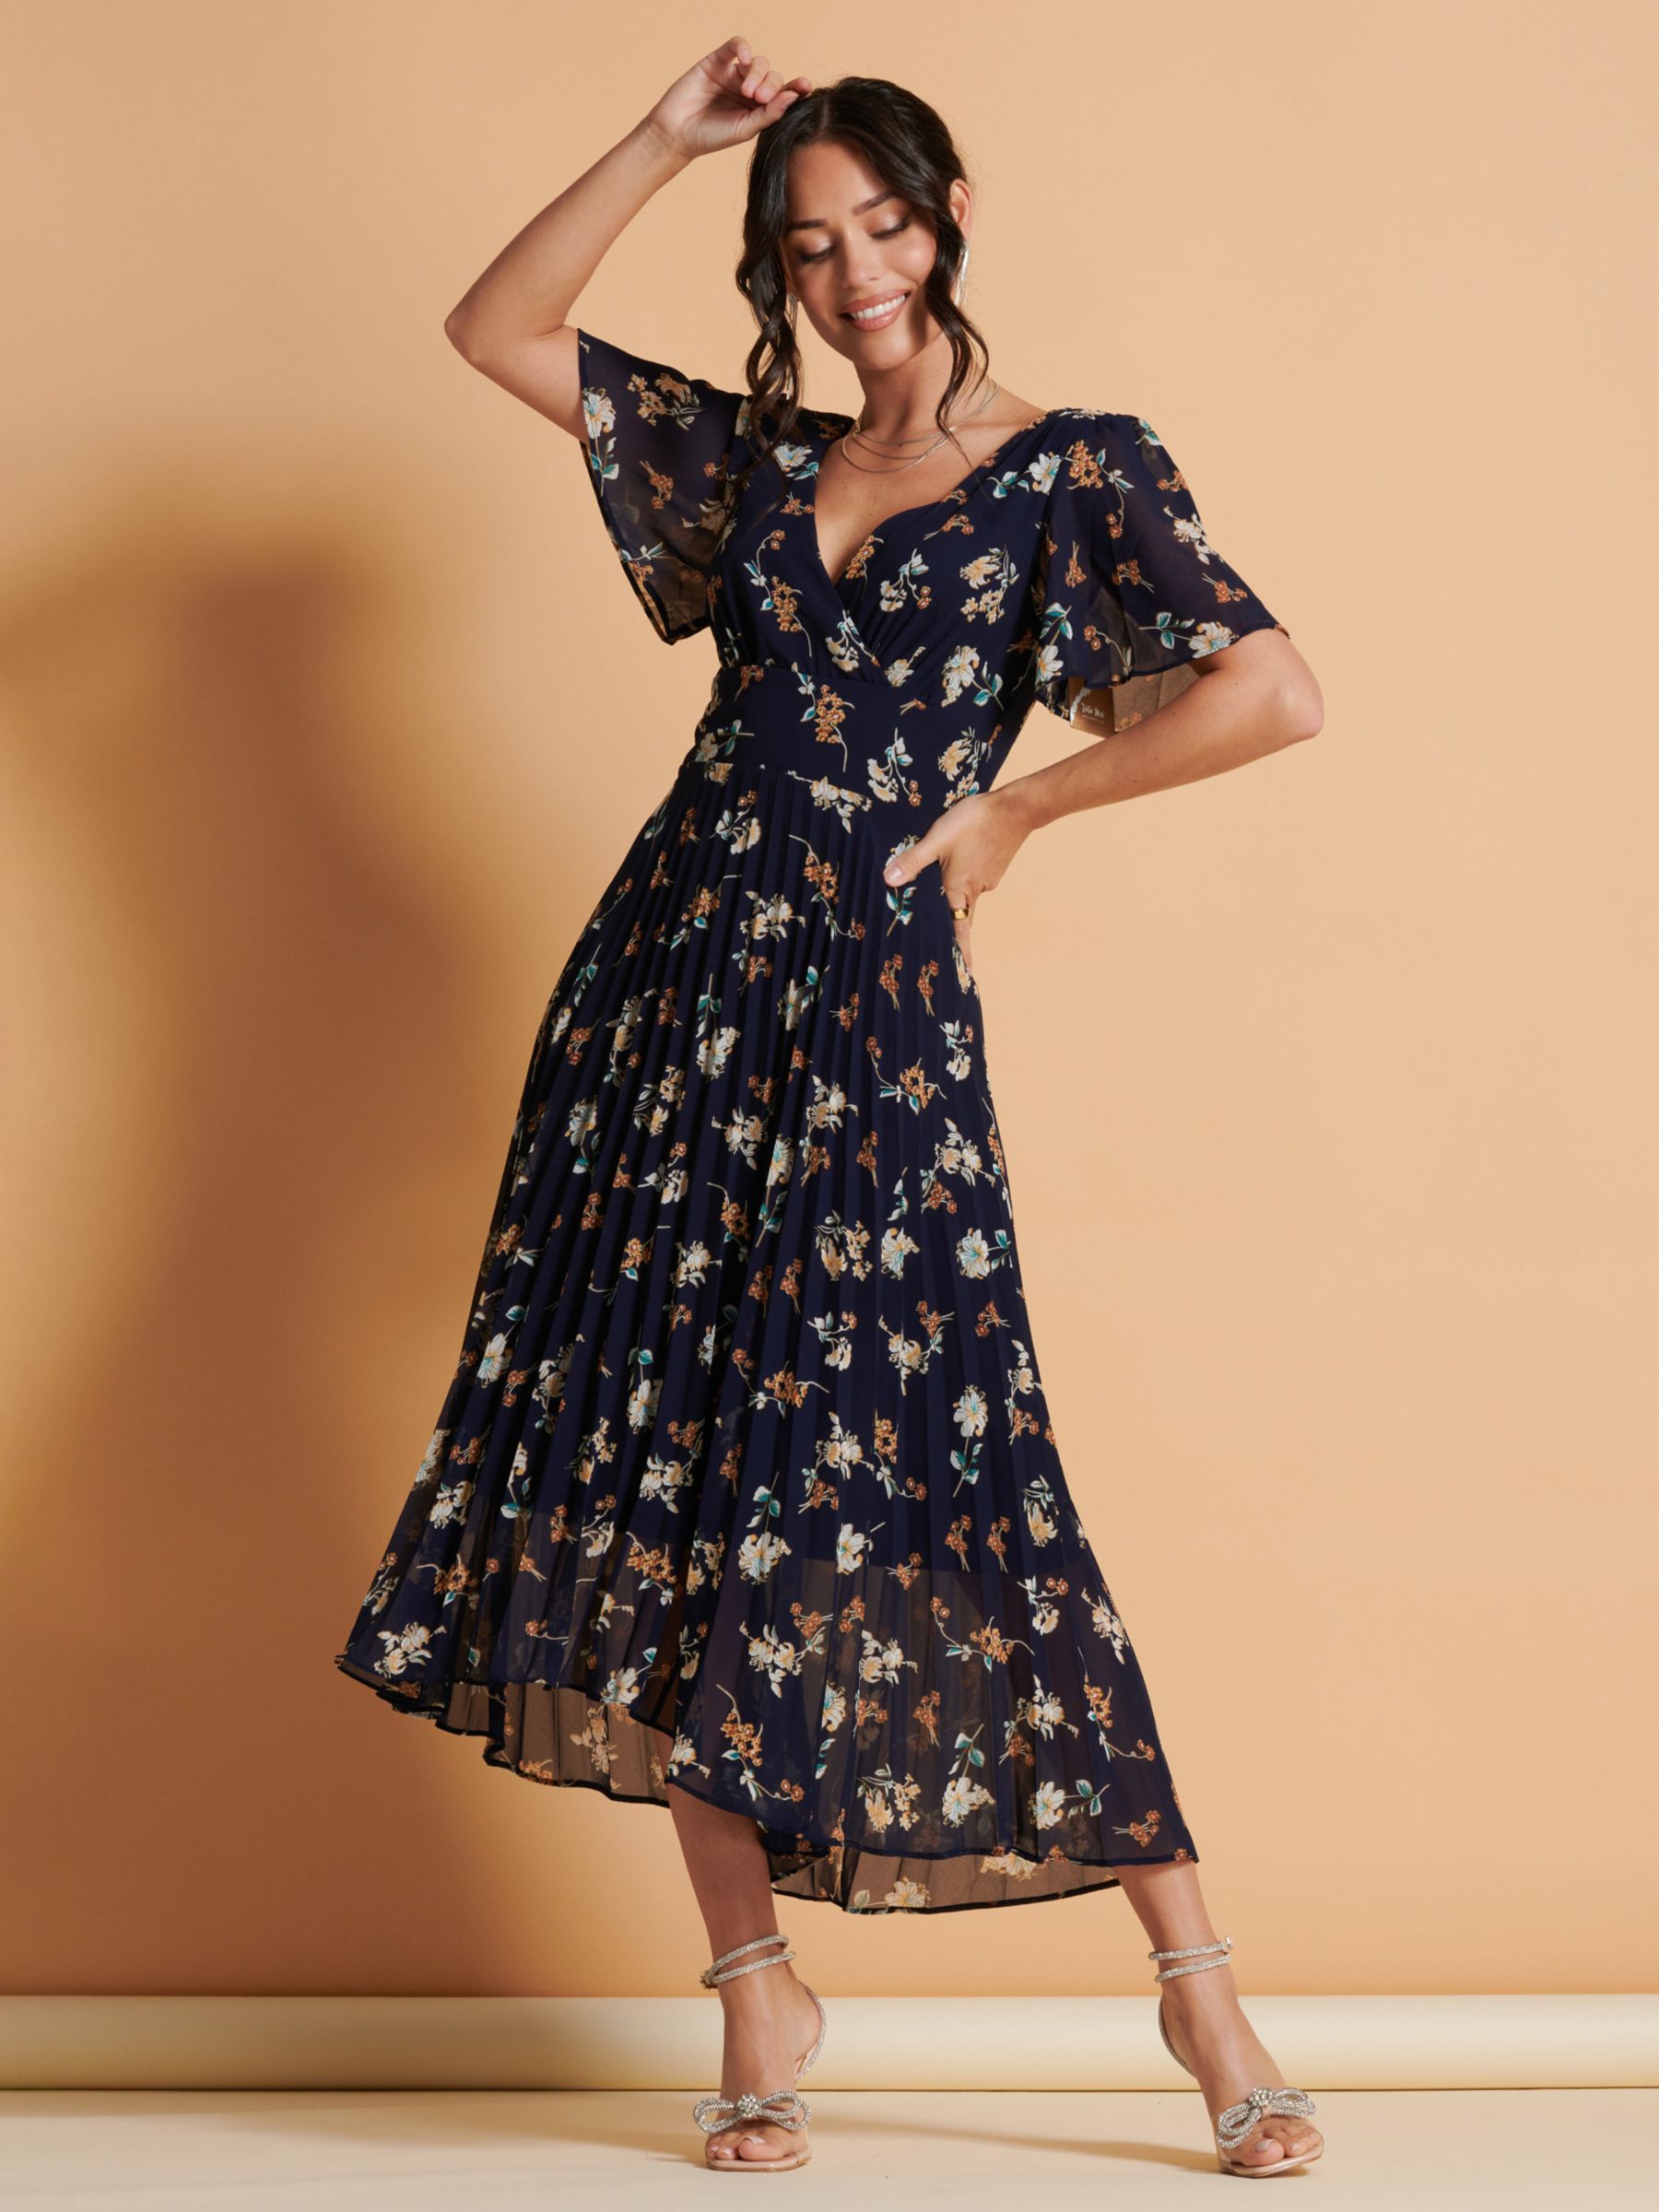 Buy Jolie Moi Pleated Floral Chiffon Maxi Dress, Navy/Multi Online at johnlewis.com